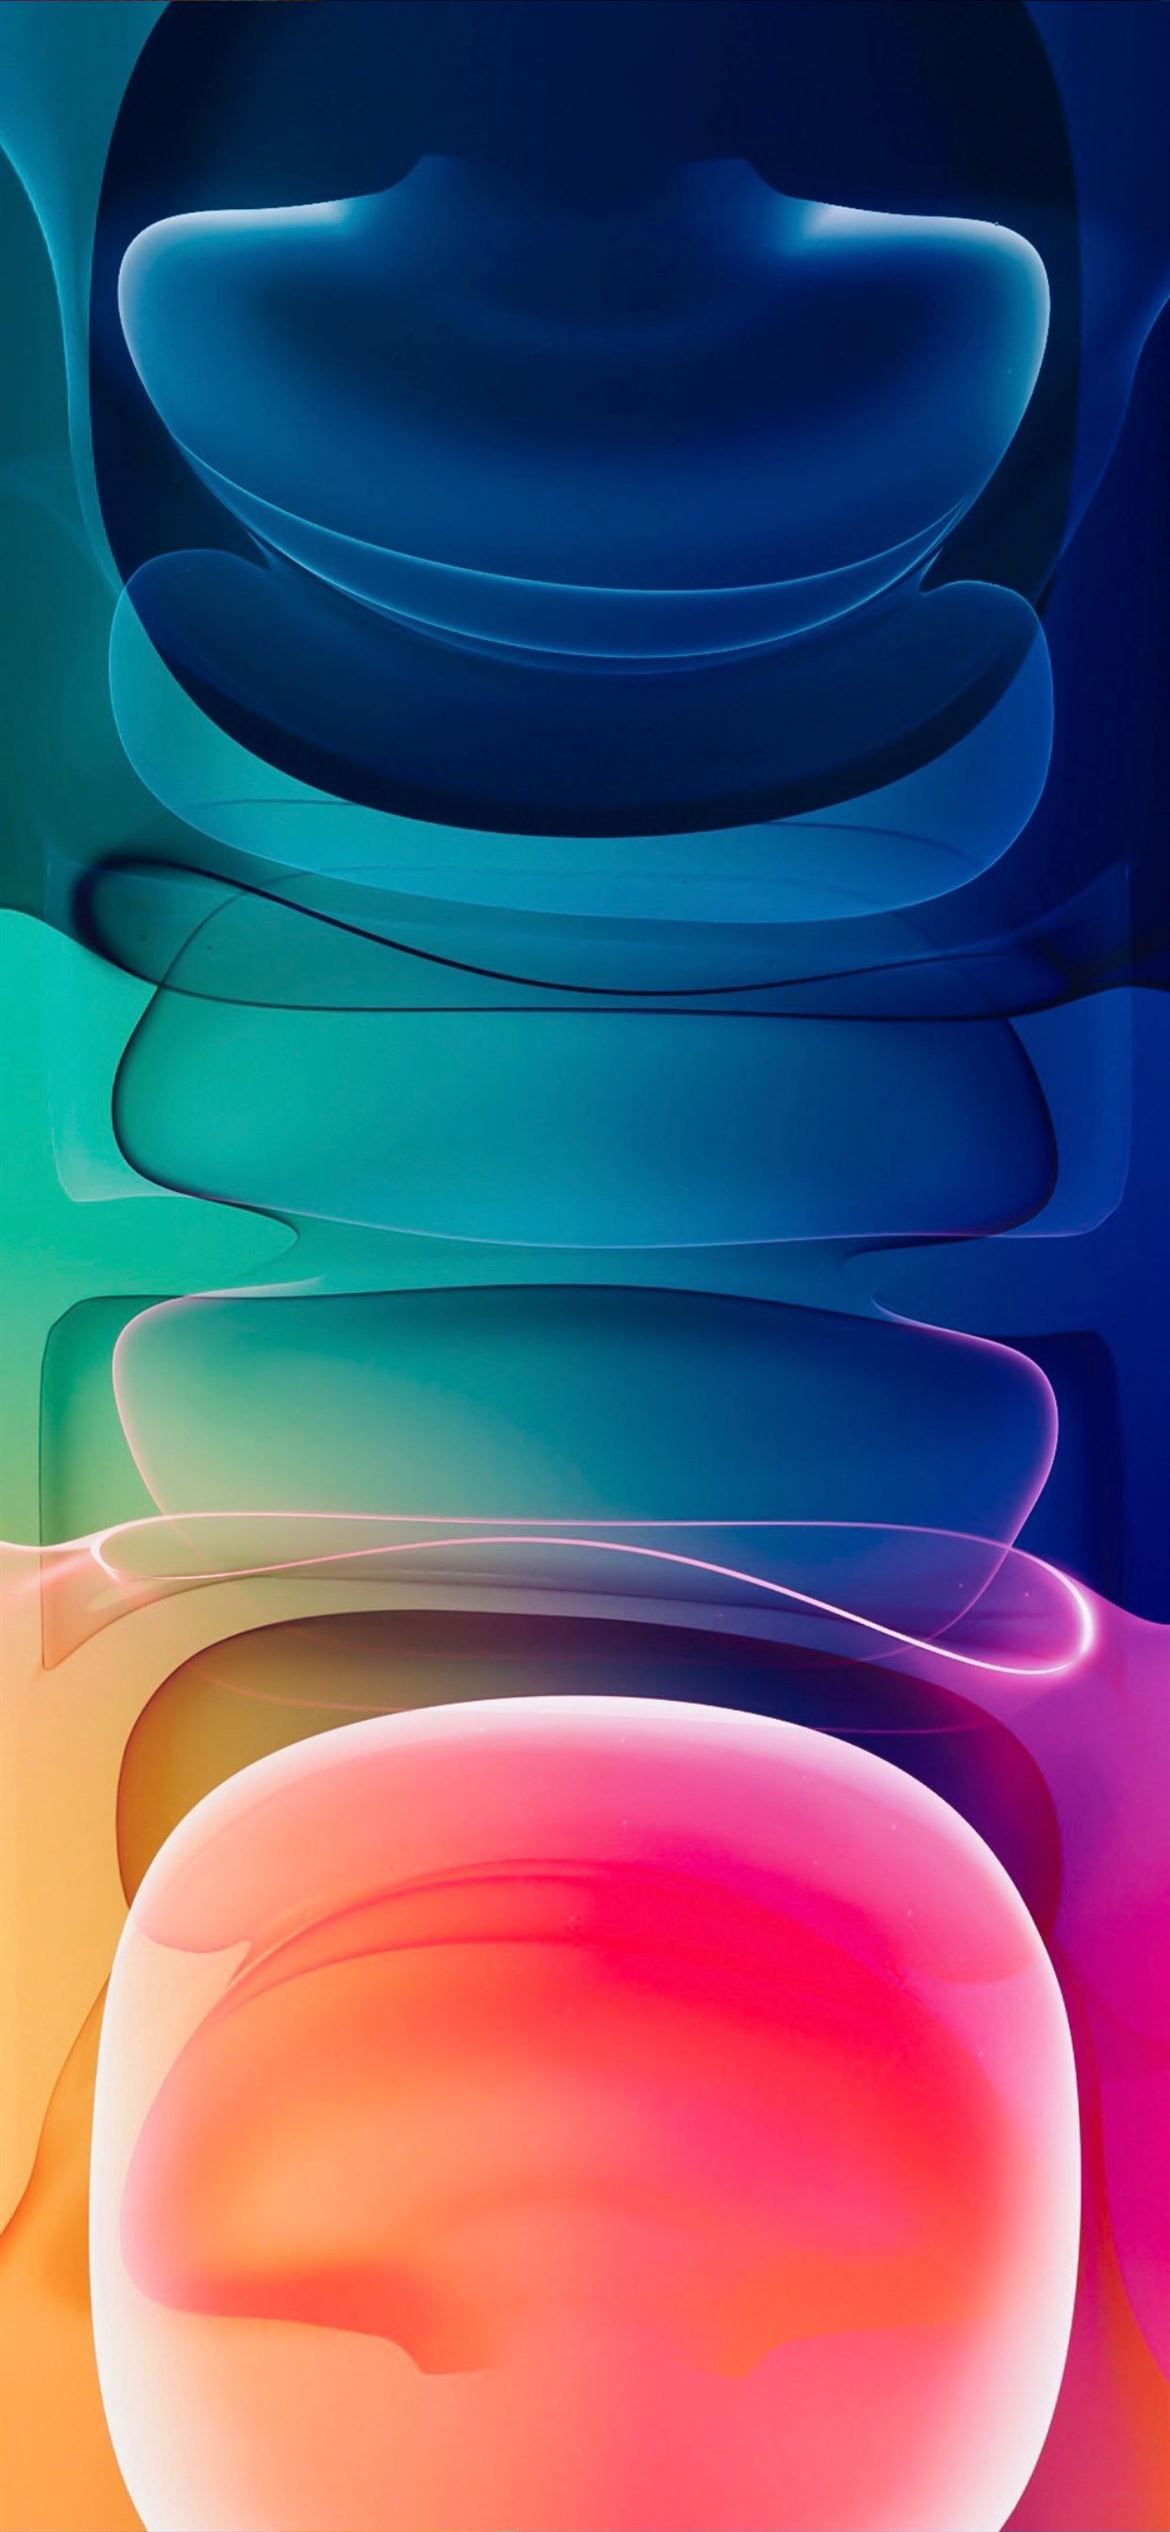 Iphone 12 Pro Max Wallpapers On Wallpaperdog